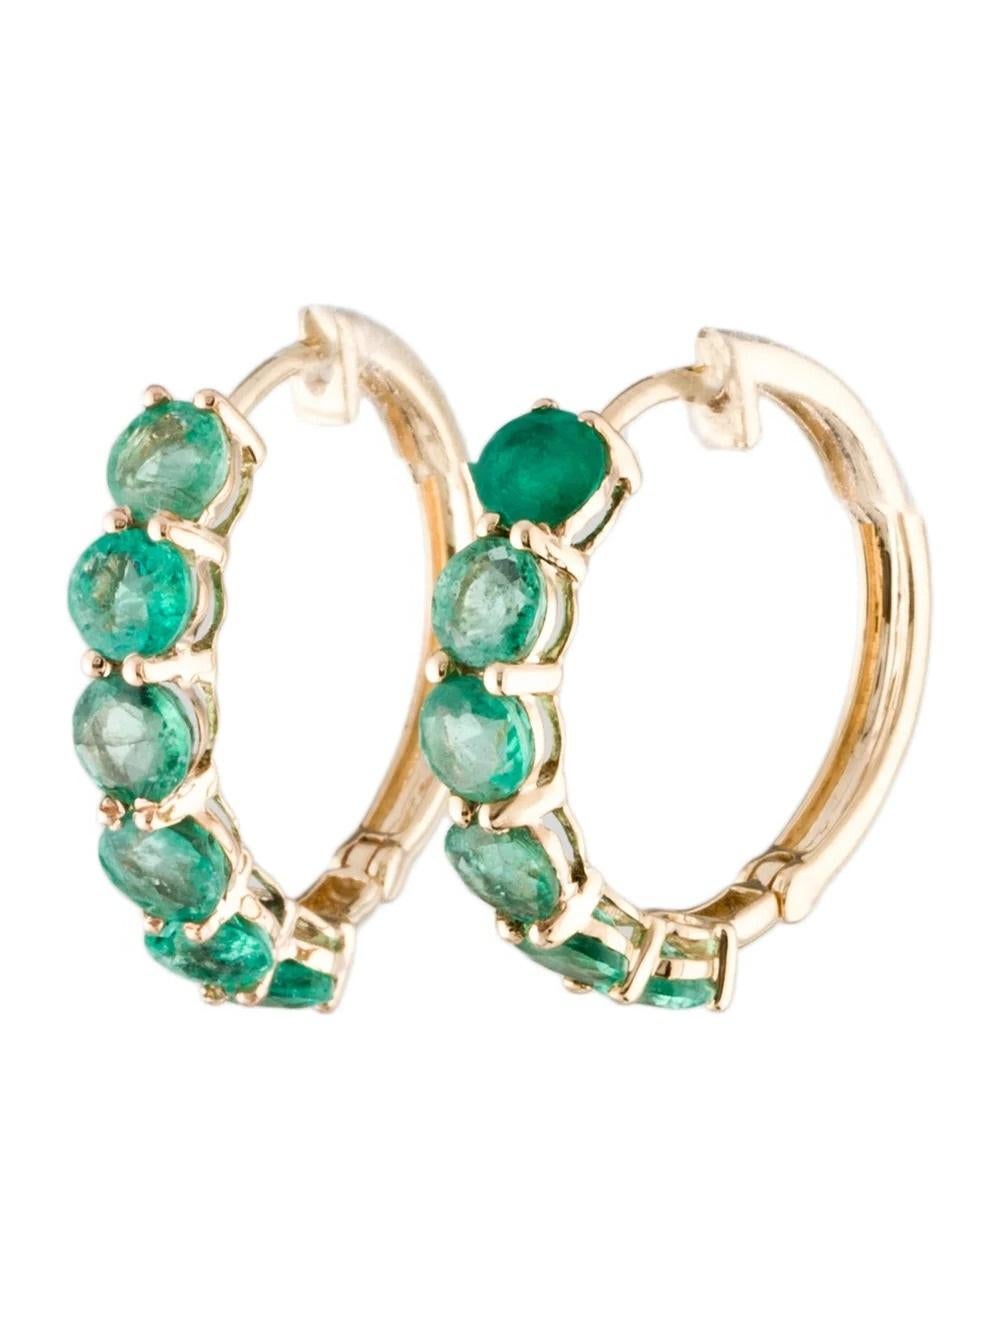 Elevate your style with these exquisite 14K yellow gold hoop earrings, featuring dazzling round modified brilliant emeralds. Crafted to perfection, these earrings exude elegance and sophistication, making them a perfect addition to any jewelry